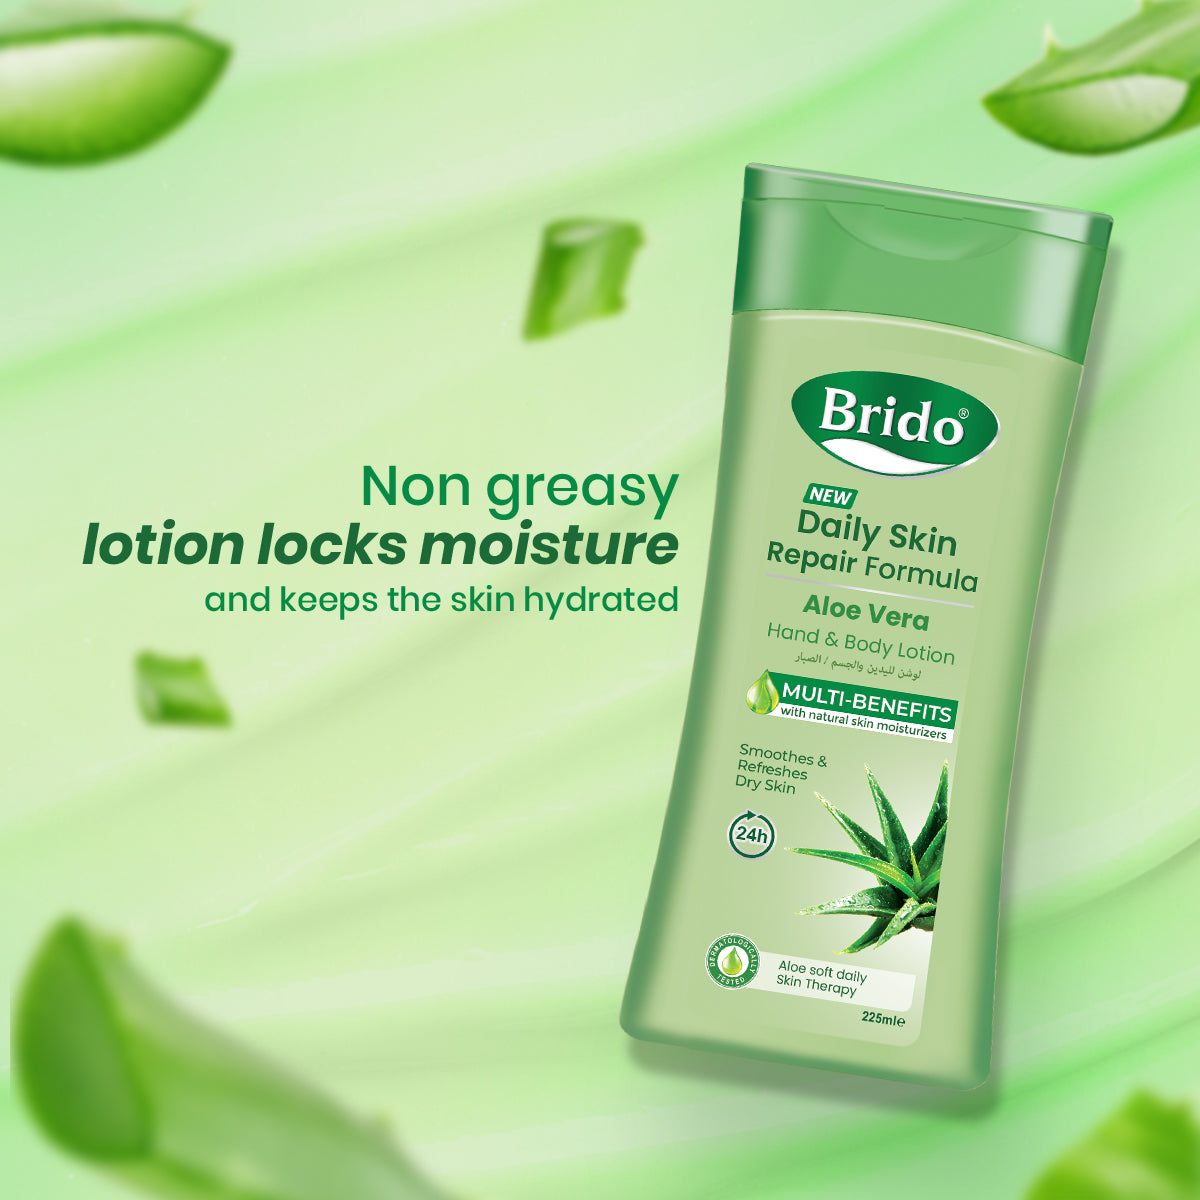  Aloe Vera Body Lotion (Skin Repair Formula) •	Skin is transformed from dry & stressed to nourished. •	Instantly moisturizes & calms dry skin to its actual, hydrated state. •	From dull to radiant skin. •	Cracked skin prevention & softens the skin. •	Made with natural ingredient Aloe Vera. •	Non-greasy formula. •	Prevents dry skin. •	Radiates the skin. •	Daily Skin Repair Formula